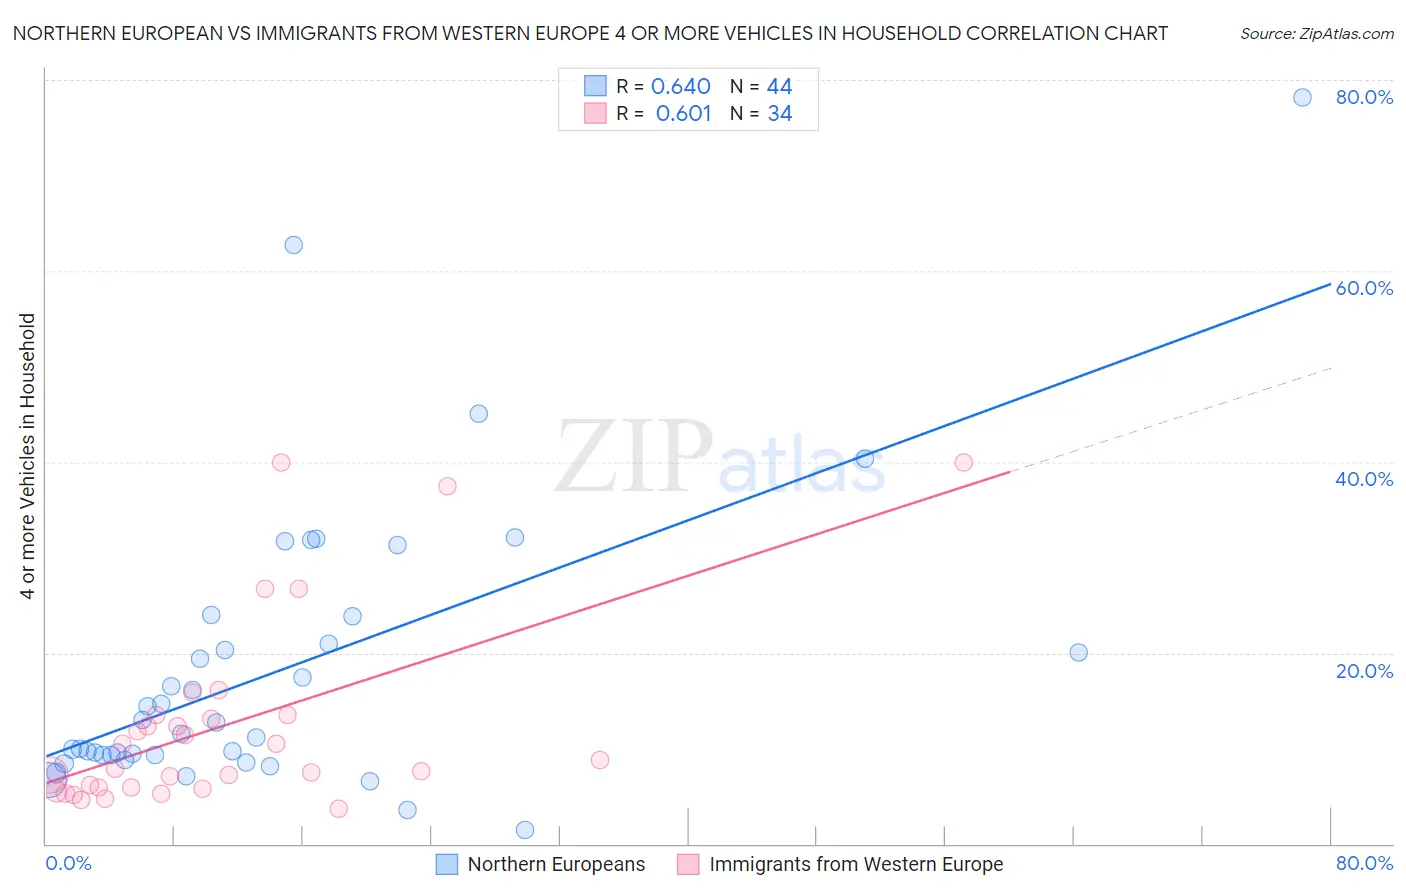 Northern European vs Immigrants from Western Europe 4 or more Vehicles in Household